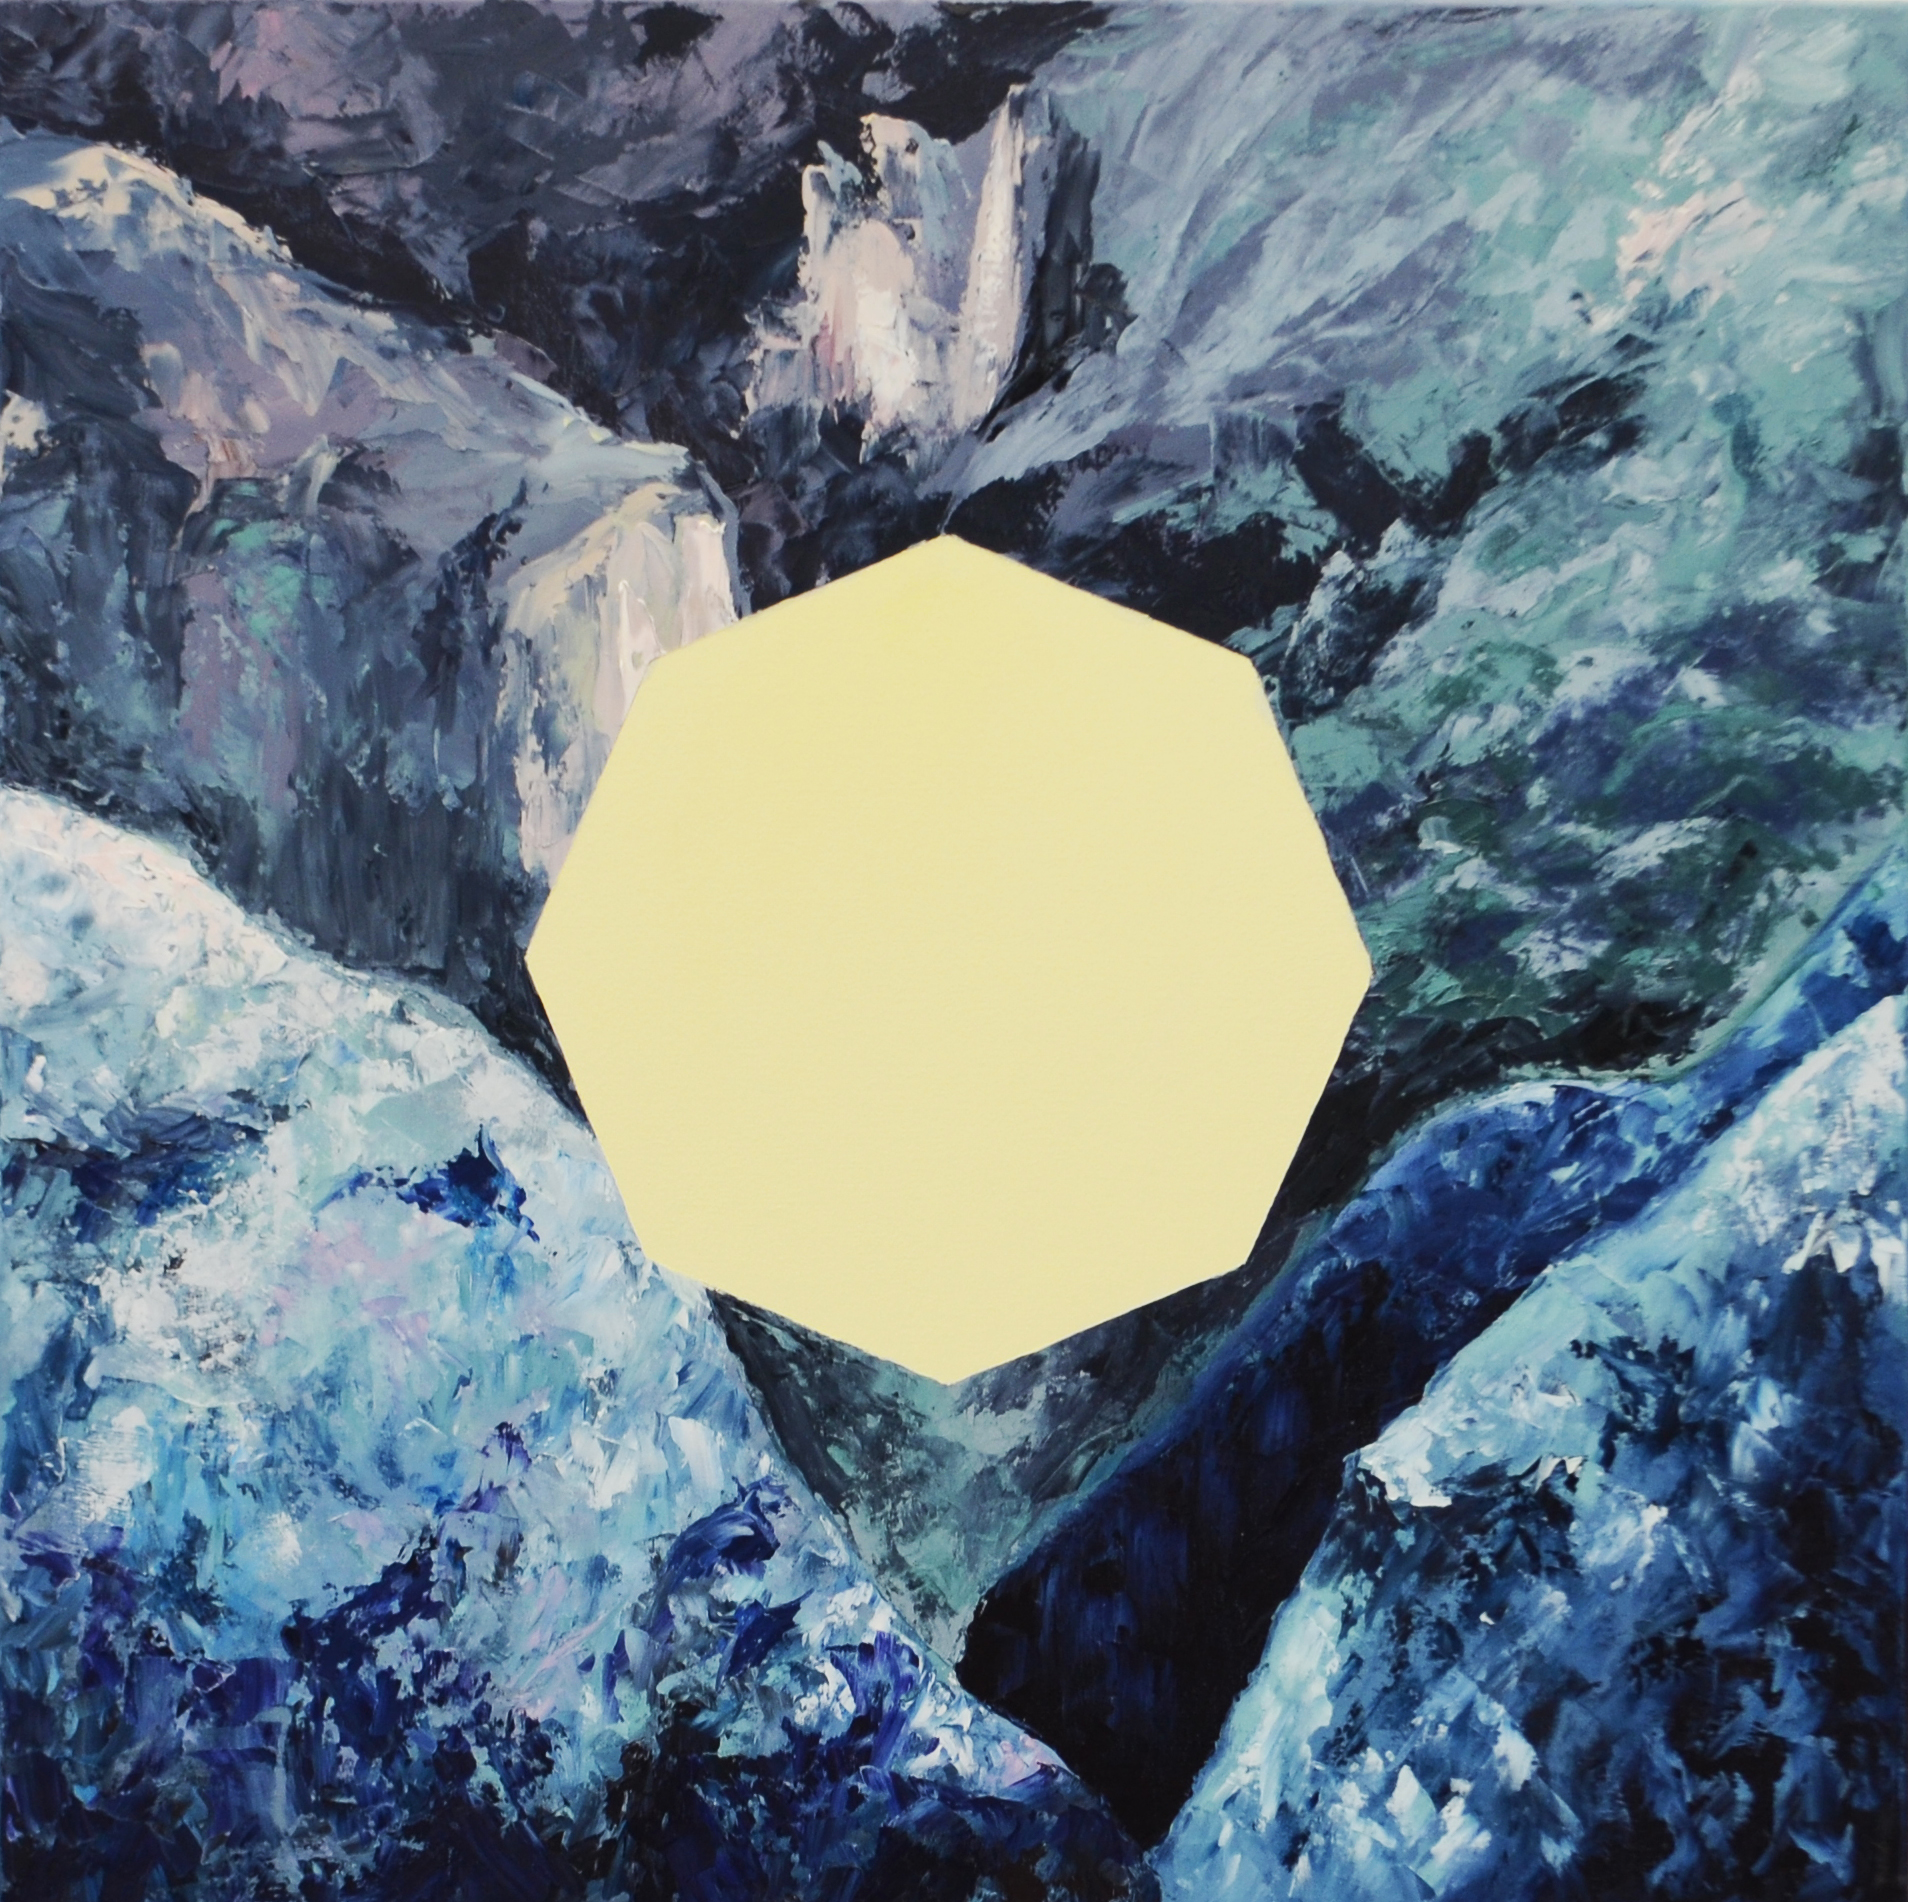   Pinnacle , 2017  oil on canvas  32 x 32 inches   